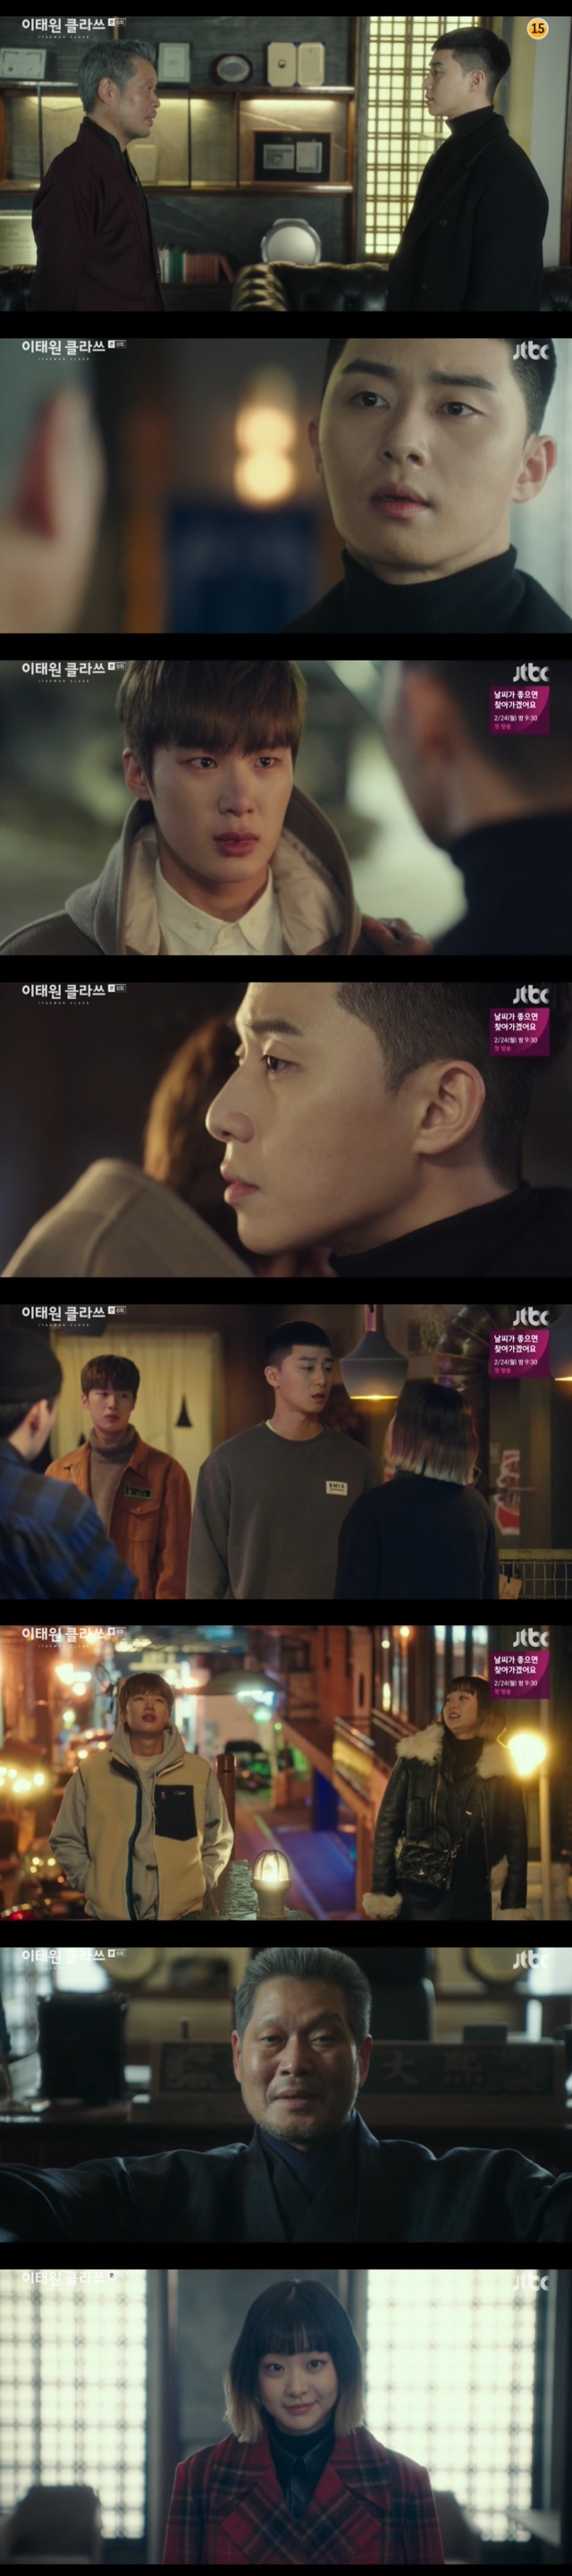 Yoo Jae-myung attacked by buying a Park Seo-joon building, followed by Kim Dae-mi.In the 8th episode of JTBCs Golden Earth Drama Itaewon Klath (playplayed by Cho Kwang-jin/directed by Kim Sung-yoon) broadcast on February 22, Park Seo-joon, who buys a building in Kyungri Dangil, was portrayed in the attack of Jang Dae-hee (Yoo Jae-myung).Roy was shocked to learn that the new owner of the building was Jang Dae-hee.Jang Dae-hee, who sang Park Sae as a long-time owner, questioned why he hired Knotweed water (Kim Dong-hee) as an employee and warned that he would continue to buy buildings every time he opened a store to show his strength.Jang Dae-hee told me that if I kneel and apologize, I will not take anything away, but Roy said, My father told me that he was a proud son on the day he was expelled because he could not kneel.You have not taken anything from me, he said. The strength I think comes from people. The strength comes from them.Ill be stronger, he said.Roy, who heard the bad news of Roy and Jangga from Joe-yool Lee, was caught up in guilt.Your brother, its your father and I, and youre just you, Park said, I thought you needed a place to lean on then.I can cross the subject, but it can be a little funny, but I thought it would be a place for me to lean on. Knotweed water apologized to Roy, who comforted him. Knotweed water said, I am really sorry for all the actions our family has done to my brother.Youll be punished, he said.Lee Ho-jin (Lee Da-wit) suggested that he should organize the store and do all-in to help Kang Min-jung (Kim Hye-eun), but Park refused, saying he would protect his own person.Knotweed Water told Joe-yool Lee, who treats him coldly, that he would persuade Jang to return to the market if he did not touch Roy.If youre not going to stop, if its your father, or your brother, then why not? said Roy, who had been in the store for a while.I like you like your brother and I like you. Joe-yool Lee said, I will tell my father well on condition that my father get out of here.Its all done if you go out with one muscle. So the furious Park tore off Joe-yool Lees managers name tag.To achieve his dream of breaking the long street, he said, Just cut one alba and its over. What are you going to lose a few hundred million won?I dont want you to lose money, he shouted.But Park was angry that Joe-yol Lee, who thought it was his side, was unbearable, although it was natural for the enemy to attack.Joe-yool Lee said, Ideal sounds cant guarantee that well be kicked out and this will happen anymore. Ive risked my life. Take responsibility.Give me a real alternative, he said, and Roy announced his plan to buy the building to recover the money he had invested in the market.SuA called Joe-yool Lee separately and pointed out that it is meaningful for Roy to prove it on the opposite side of Jang Dae-hee, and advised him that if he really wants to be on the side of Roy, he should not try to change it and be prepared to walk together.Joe-yool Lee once again realized his love for Roy, recalling what had happened.Joe-yool Lee visited Knotweed water and apologized.Joe-yol Lee told Knotweed Water that he liked himself, I love you crazy.I want to get along with you, who is such a mess, because I want to walk with you, so please do not interfere. Joe-yool Lee apologized to Park, saying he would help find Kimtoni (Chris Ryan)s father following Knotweed water.Joe-yool Lee said, Ill try to understand the most difficult thing in the world of your style, and Roy accepted Joe-yool Lees apology.The family at night prepared for a re-opening at a store they had purchased on Kyungri Dangil, and an old man told me that the store was going to be ruined every year, but Roy was not greatly disturbed.Im trusting them because we have kids, and I cant imagine a single night without Seo-yool Lee for how long Ive been here, Park told SuA, who asked why.Lee Ha-na